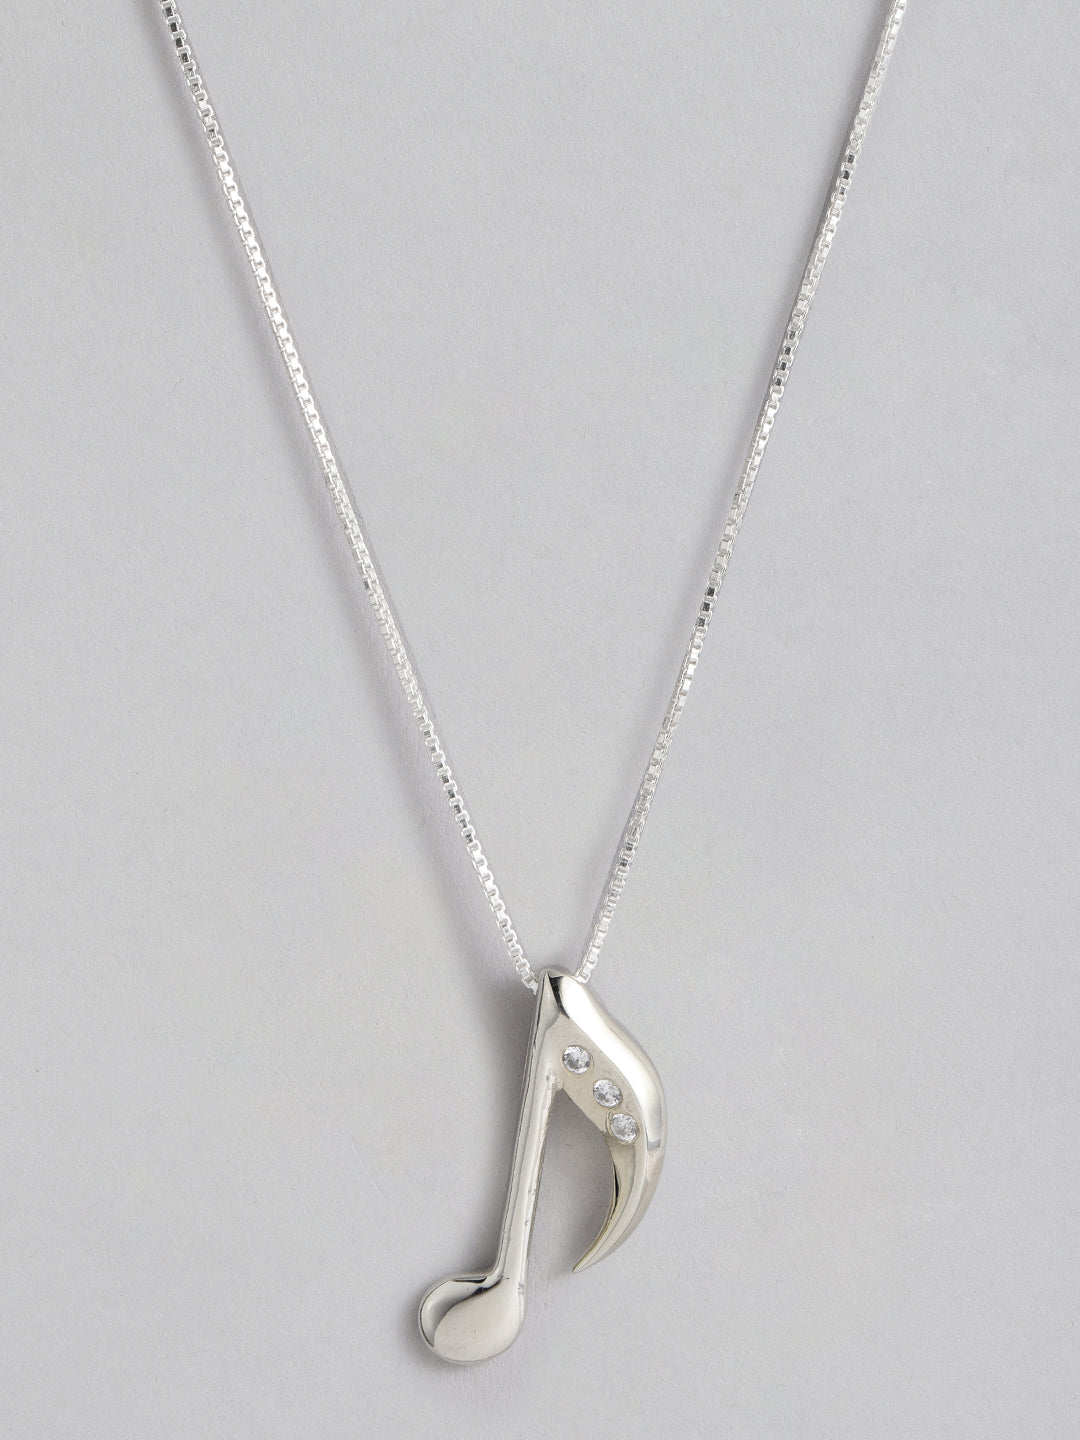 Music Note Necklace, Sterling Silver By Lily Charmed |  notonthehighstreet.com